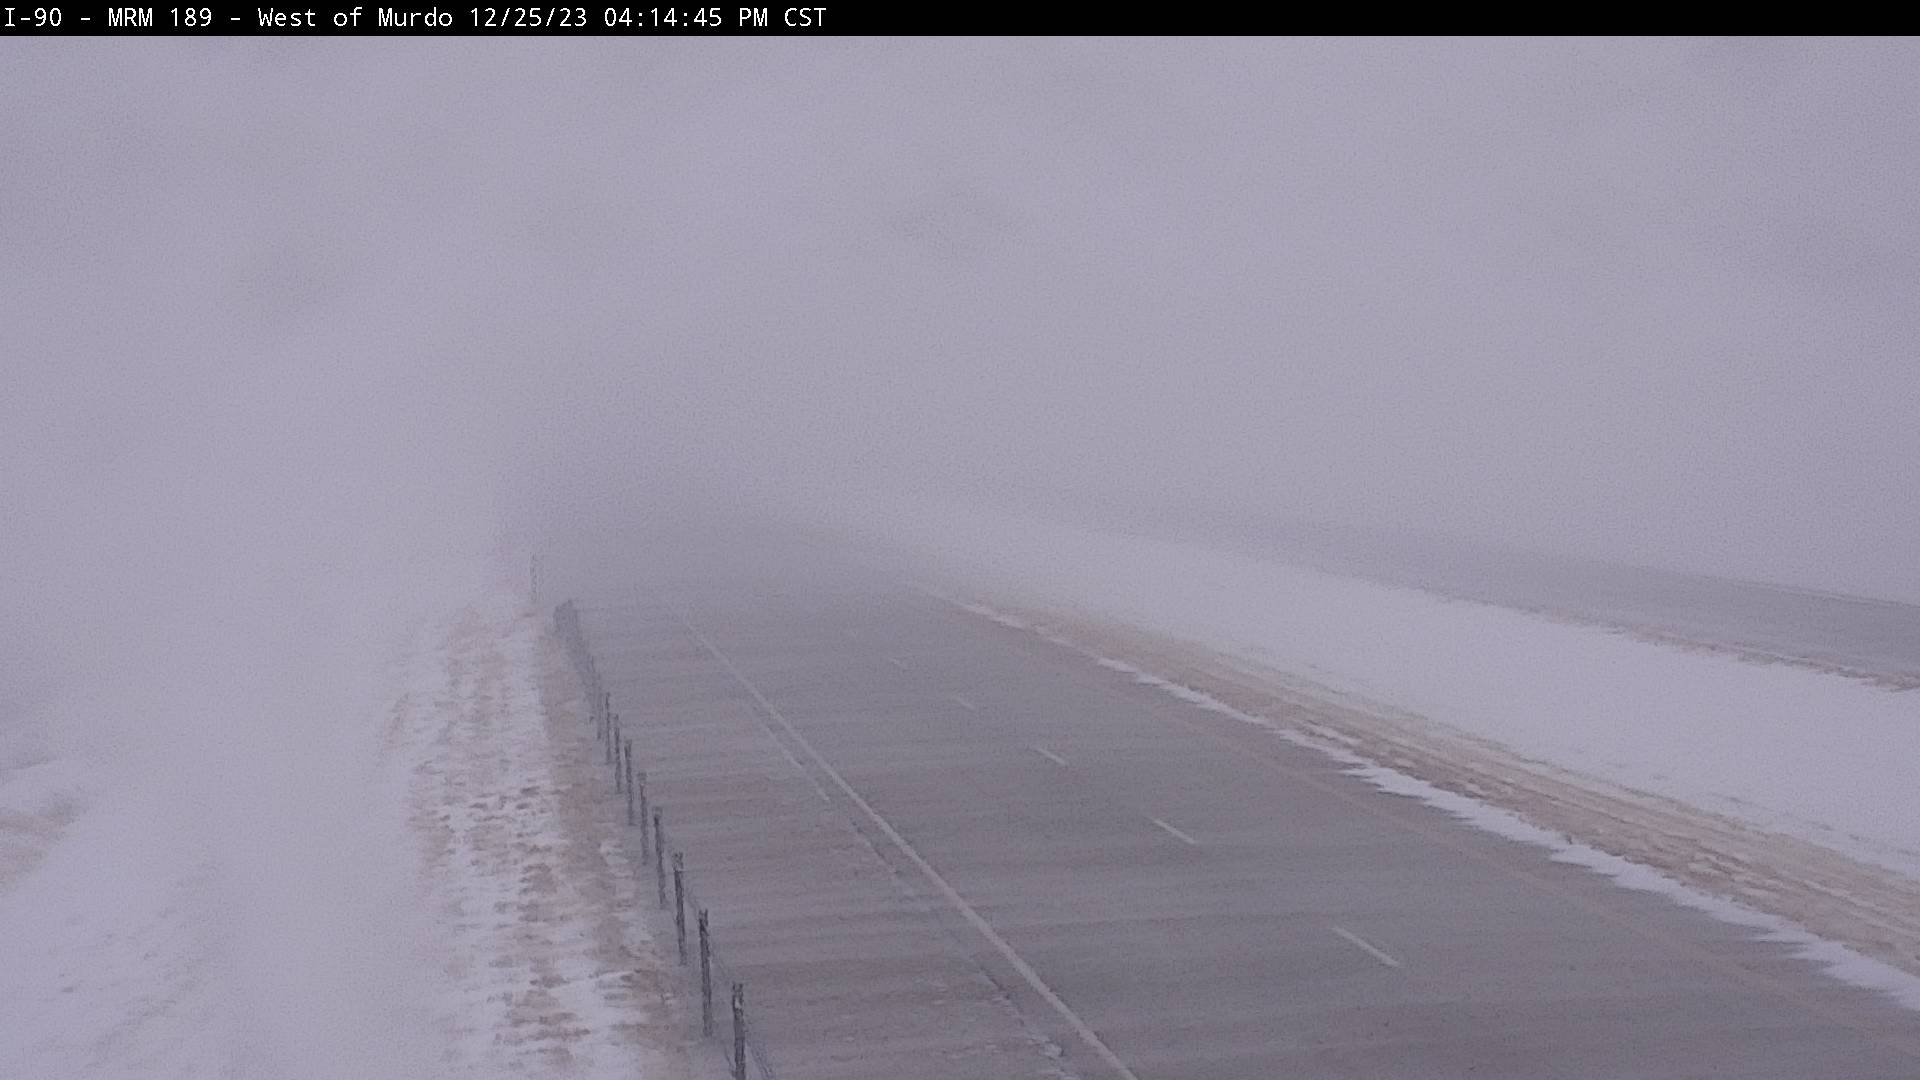 Blizzard conditions at Murdo, SD on I-90 at 4:14pm on December 25, 2023 (via SDDOT)